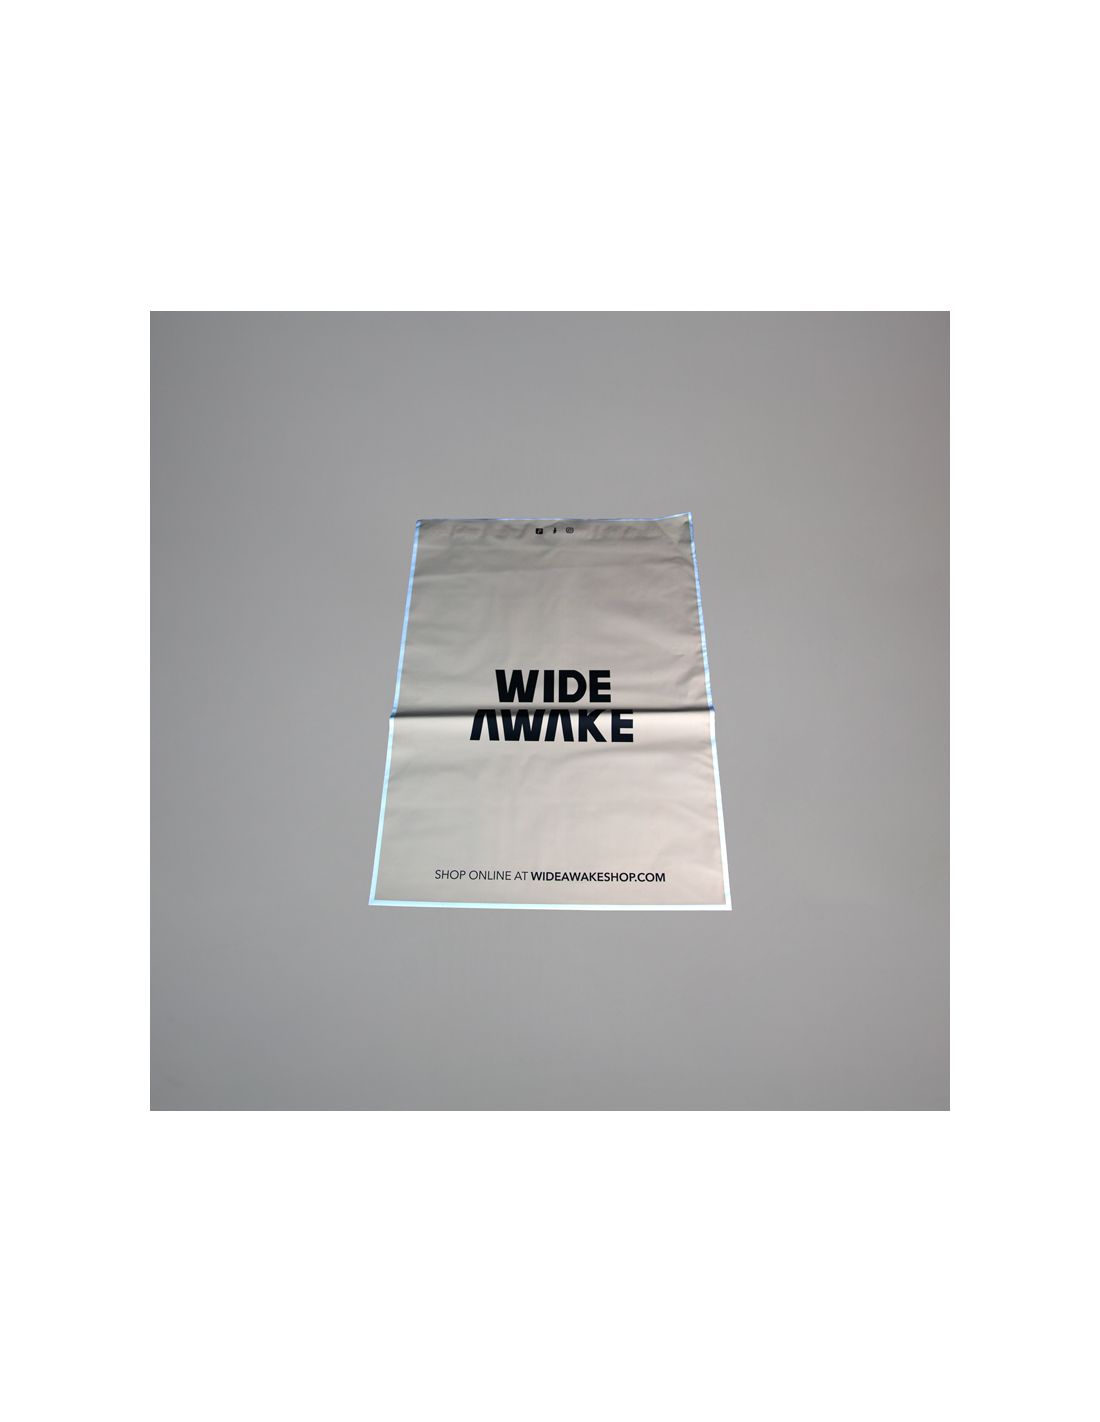 Customized Personalized shipping envelope 30x40 +5 CM | SHIPPING ENVELOPE | FLEXO PRINTING IN 1 COLOR ON FIXED DEFAULT AREA